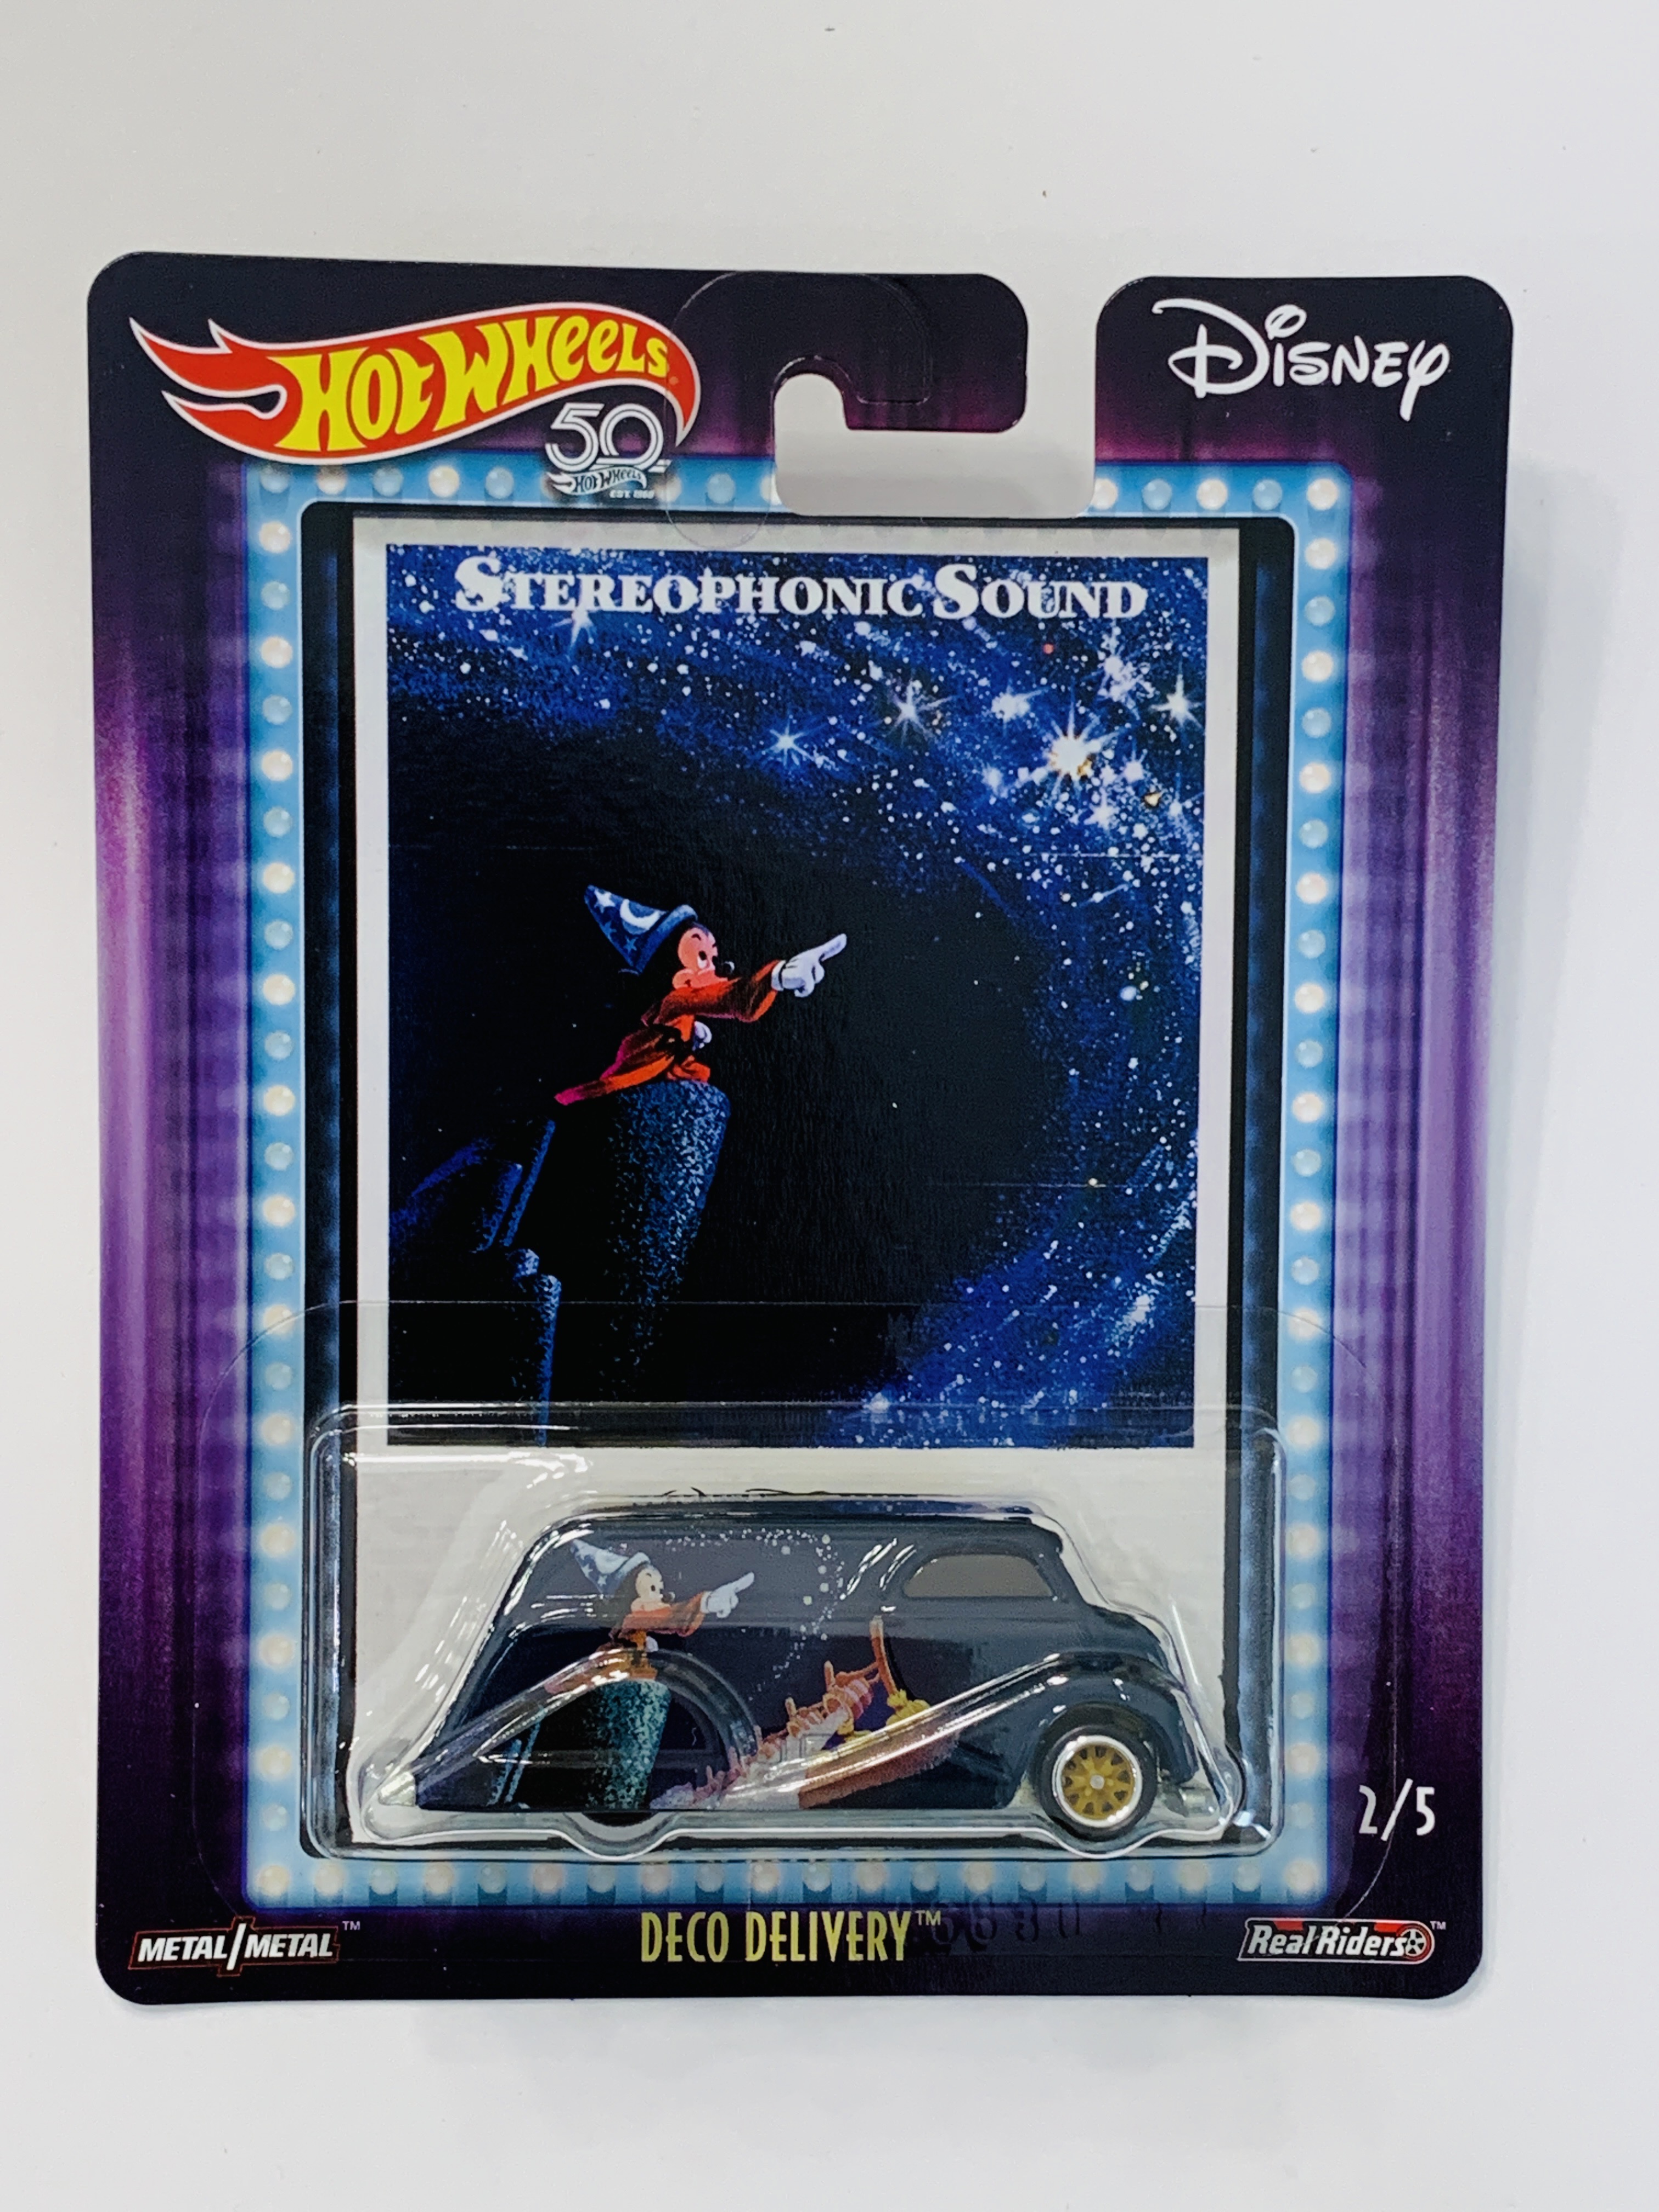 Hot Wheels Disney Stereophonic Sound Deco Delivery